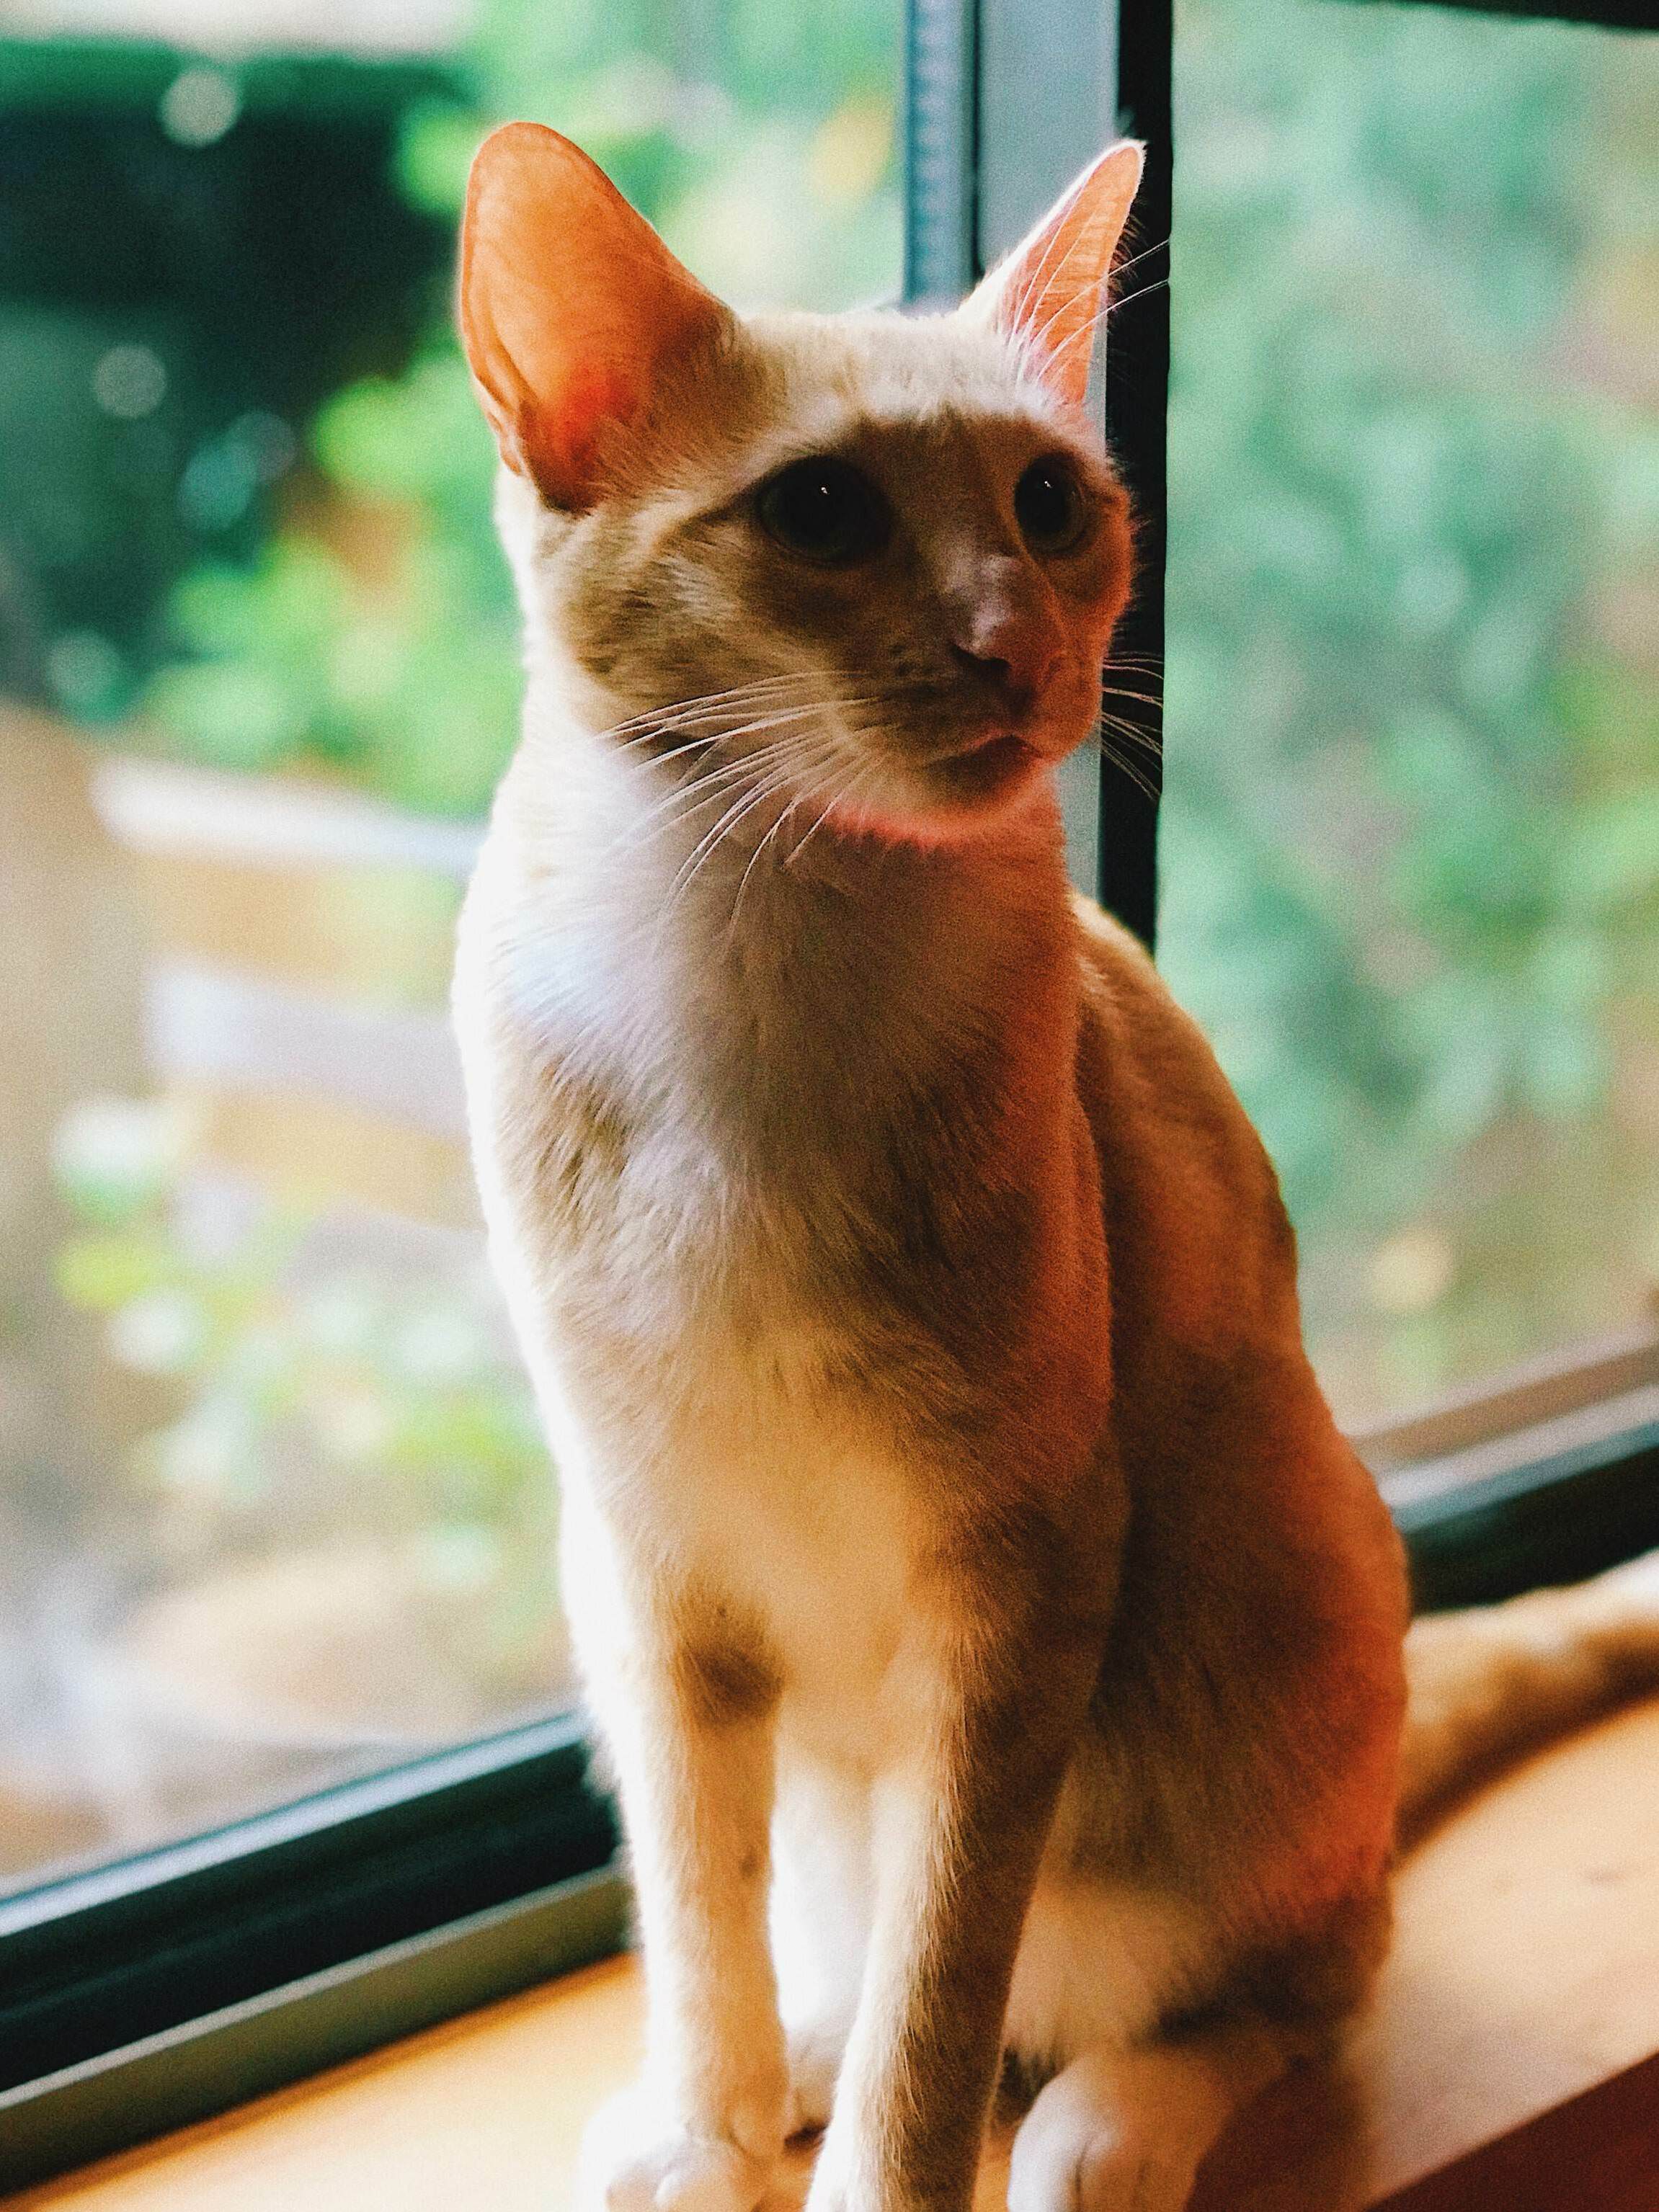 First time cat owner! meet bucky, 1 year old rescue from a shelter – adopted him over a month ago and hes been so cool and majestic!